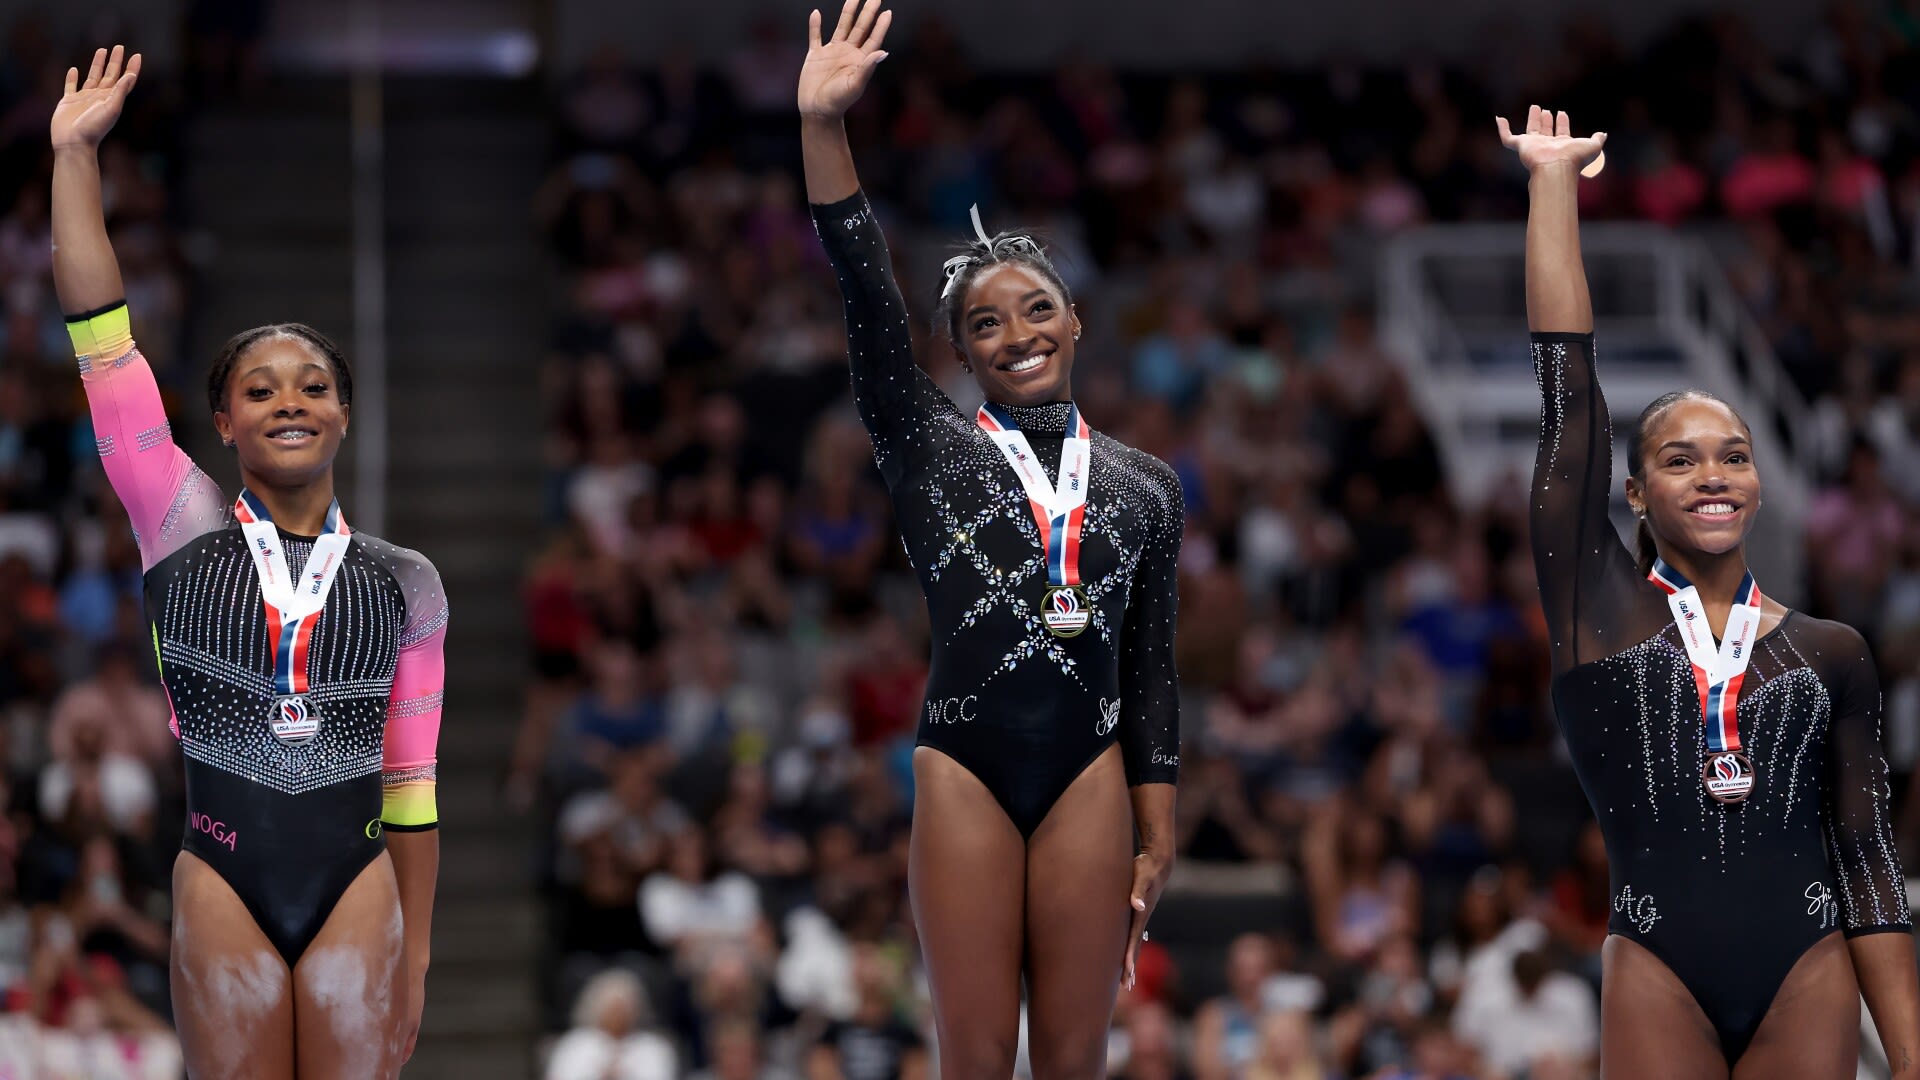 'There’s elegance in everybody:' The Black Women Transforming Elite Gymnastics